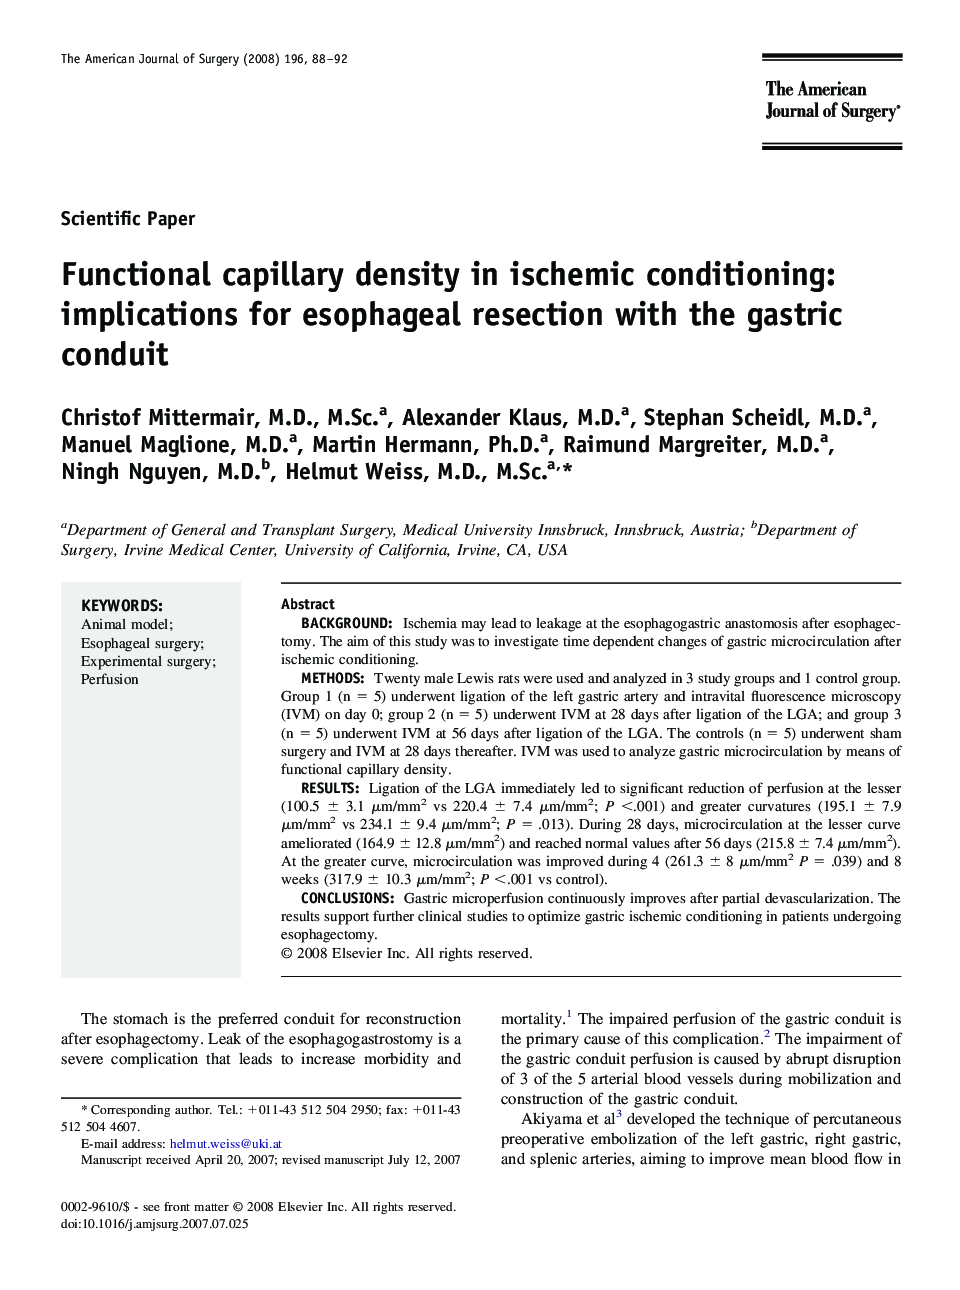 Functional capillary density in ischemic conditioning: implications for esophageal resection with the gastric conduit